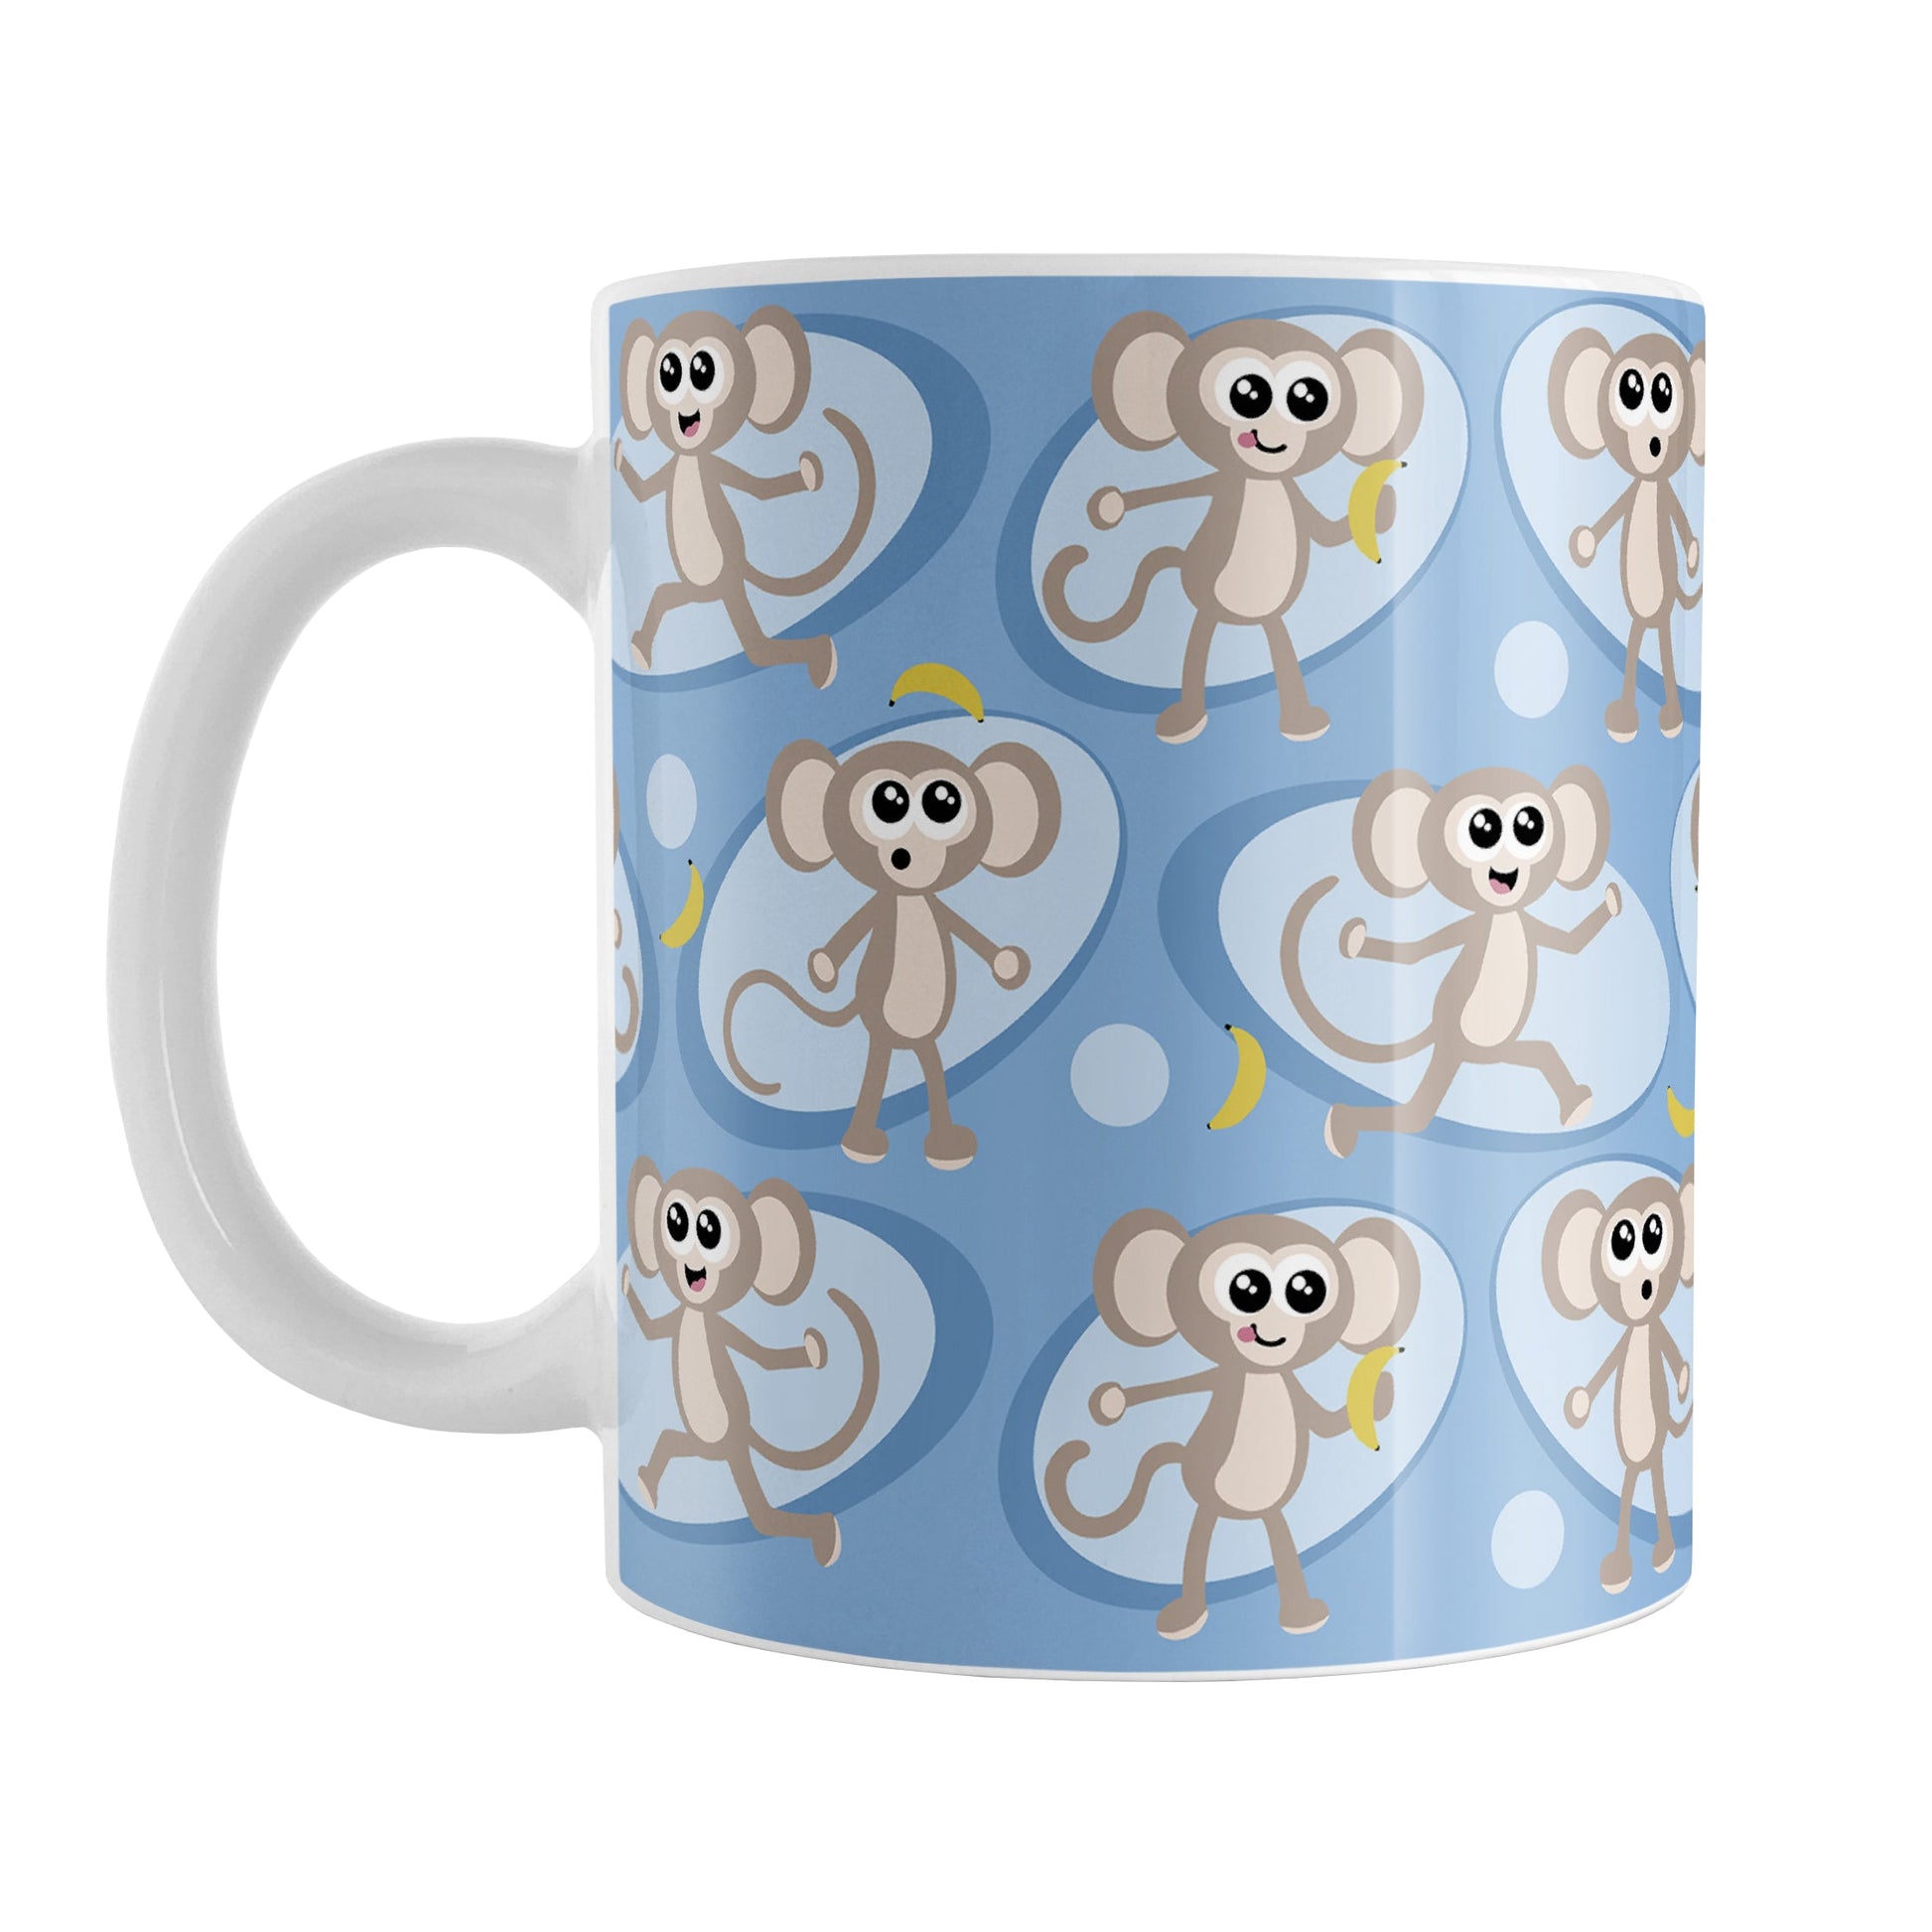 Cute Blue Monkey Pattern Mug (11oz) at Amy's Coffee Mugs. A ceramic coffee mug designed with a pattern of fun and cute brown monkeys in light blue ovals with bananas over a blue background color that wraps around the mug up to the handle.